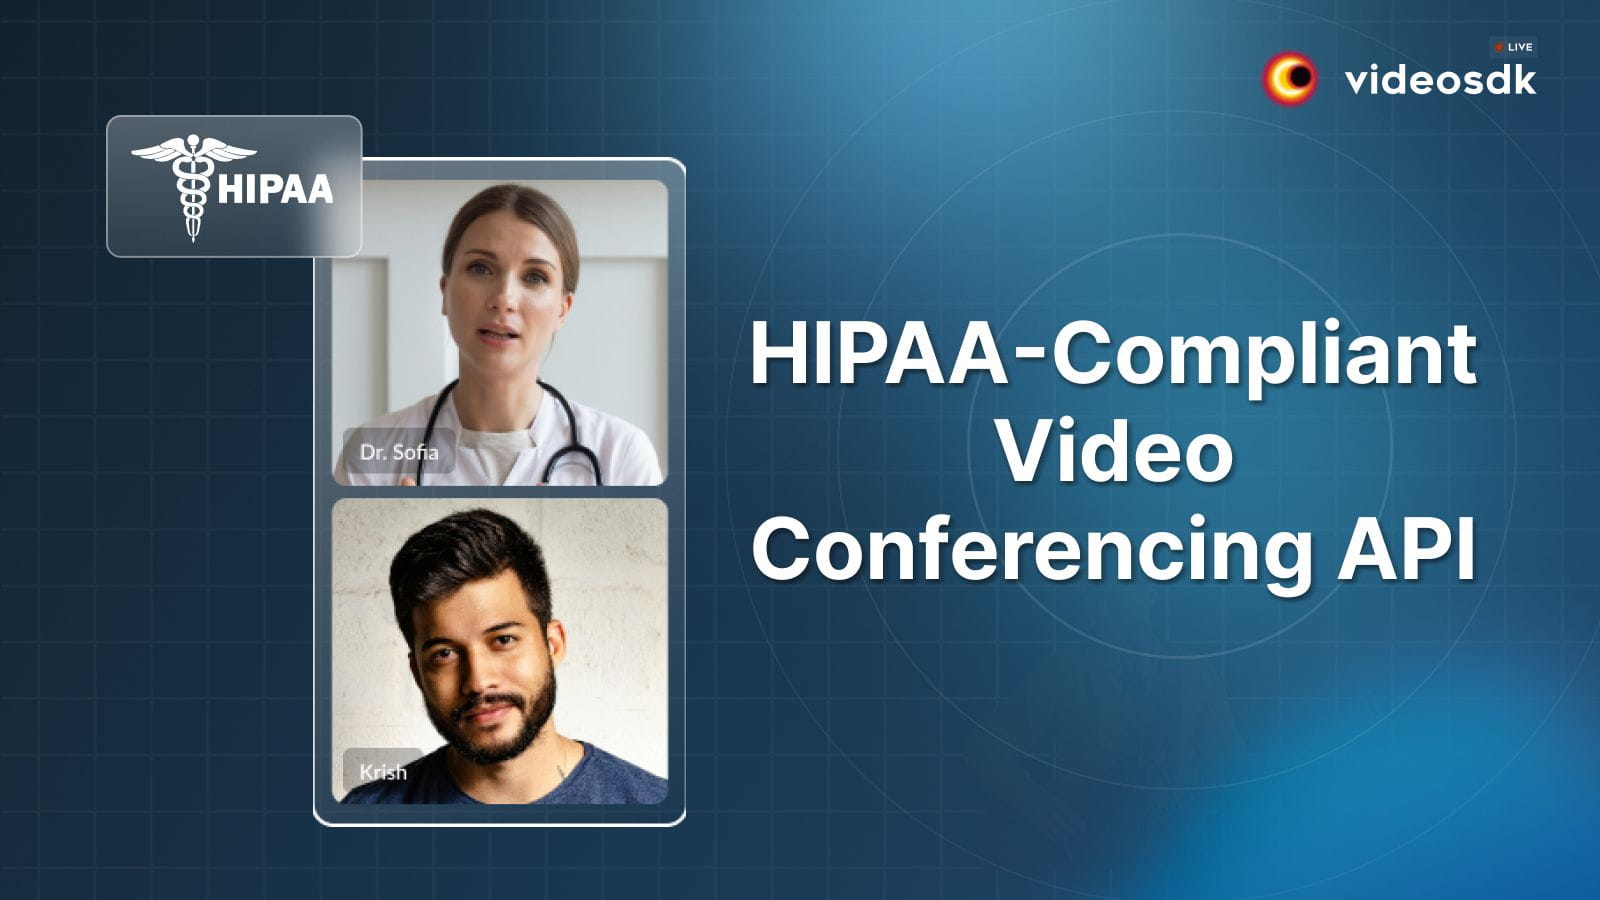 HIPAA-Compliant Video Conferencing API: Embed Telehealth Video Calls in Your App